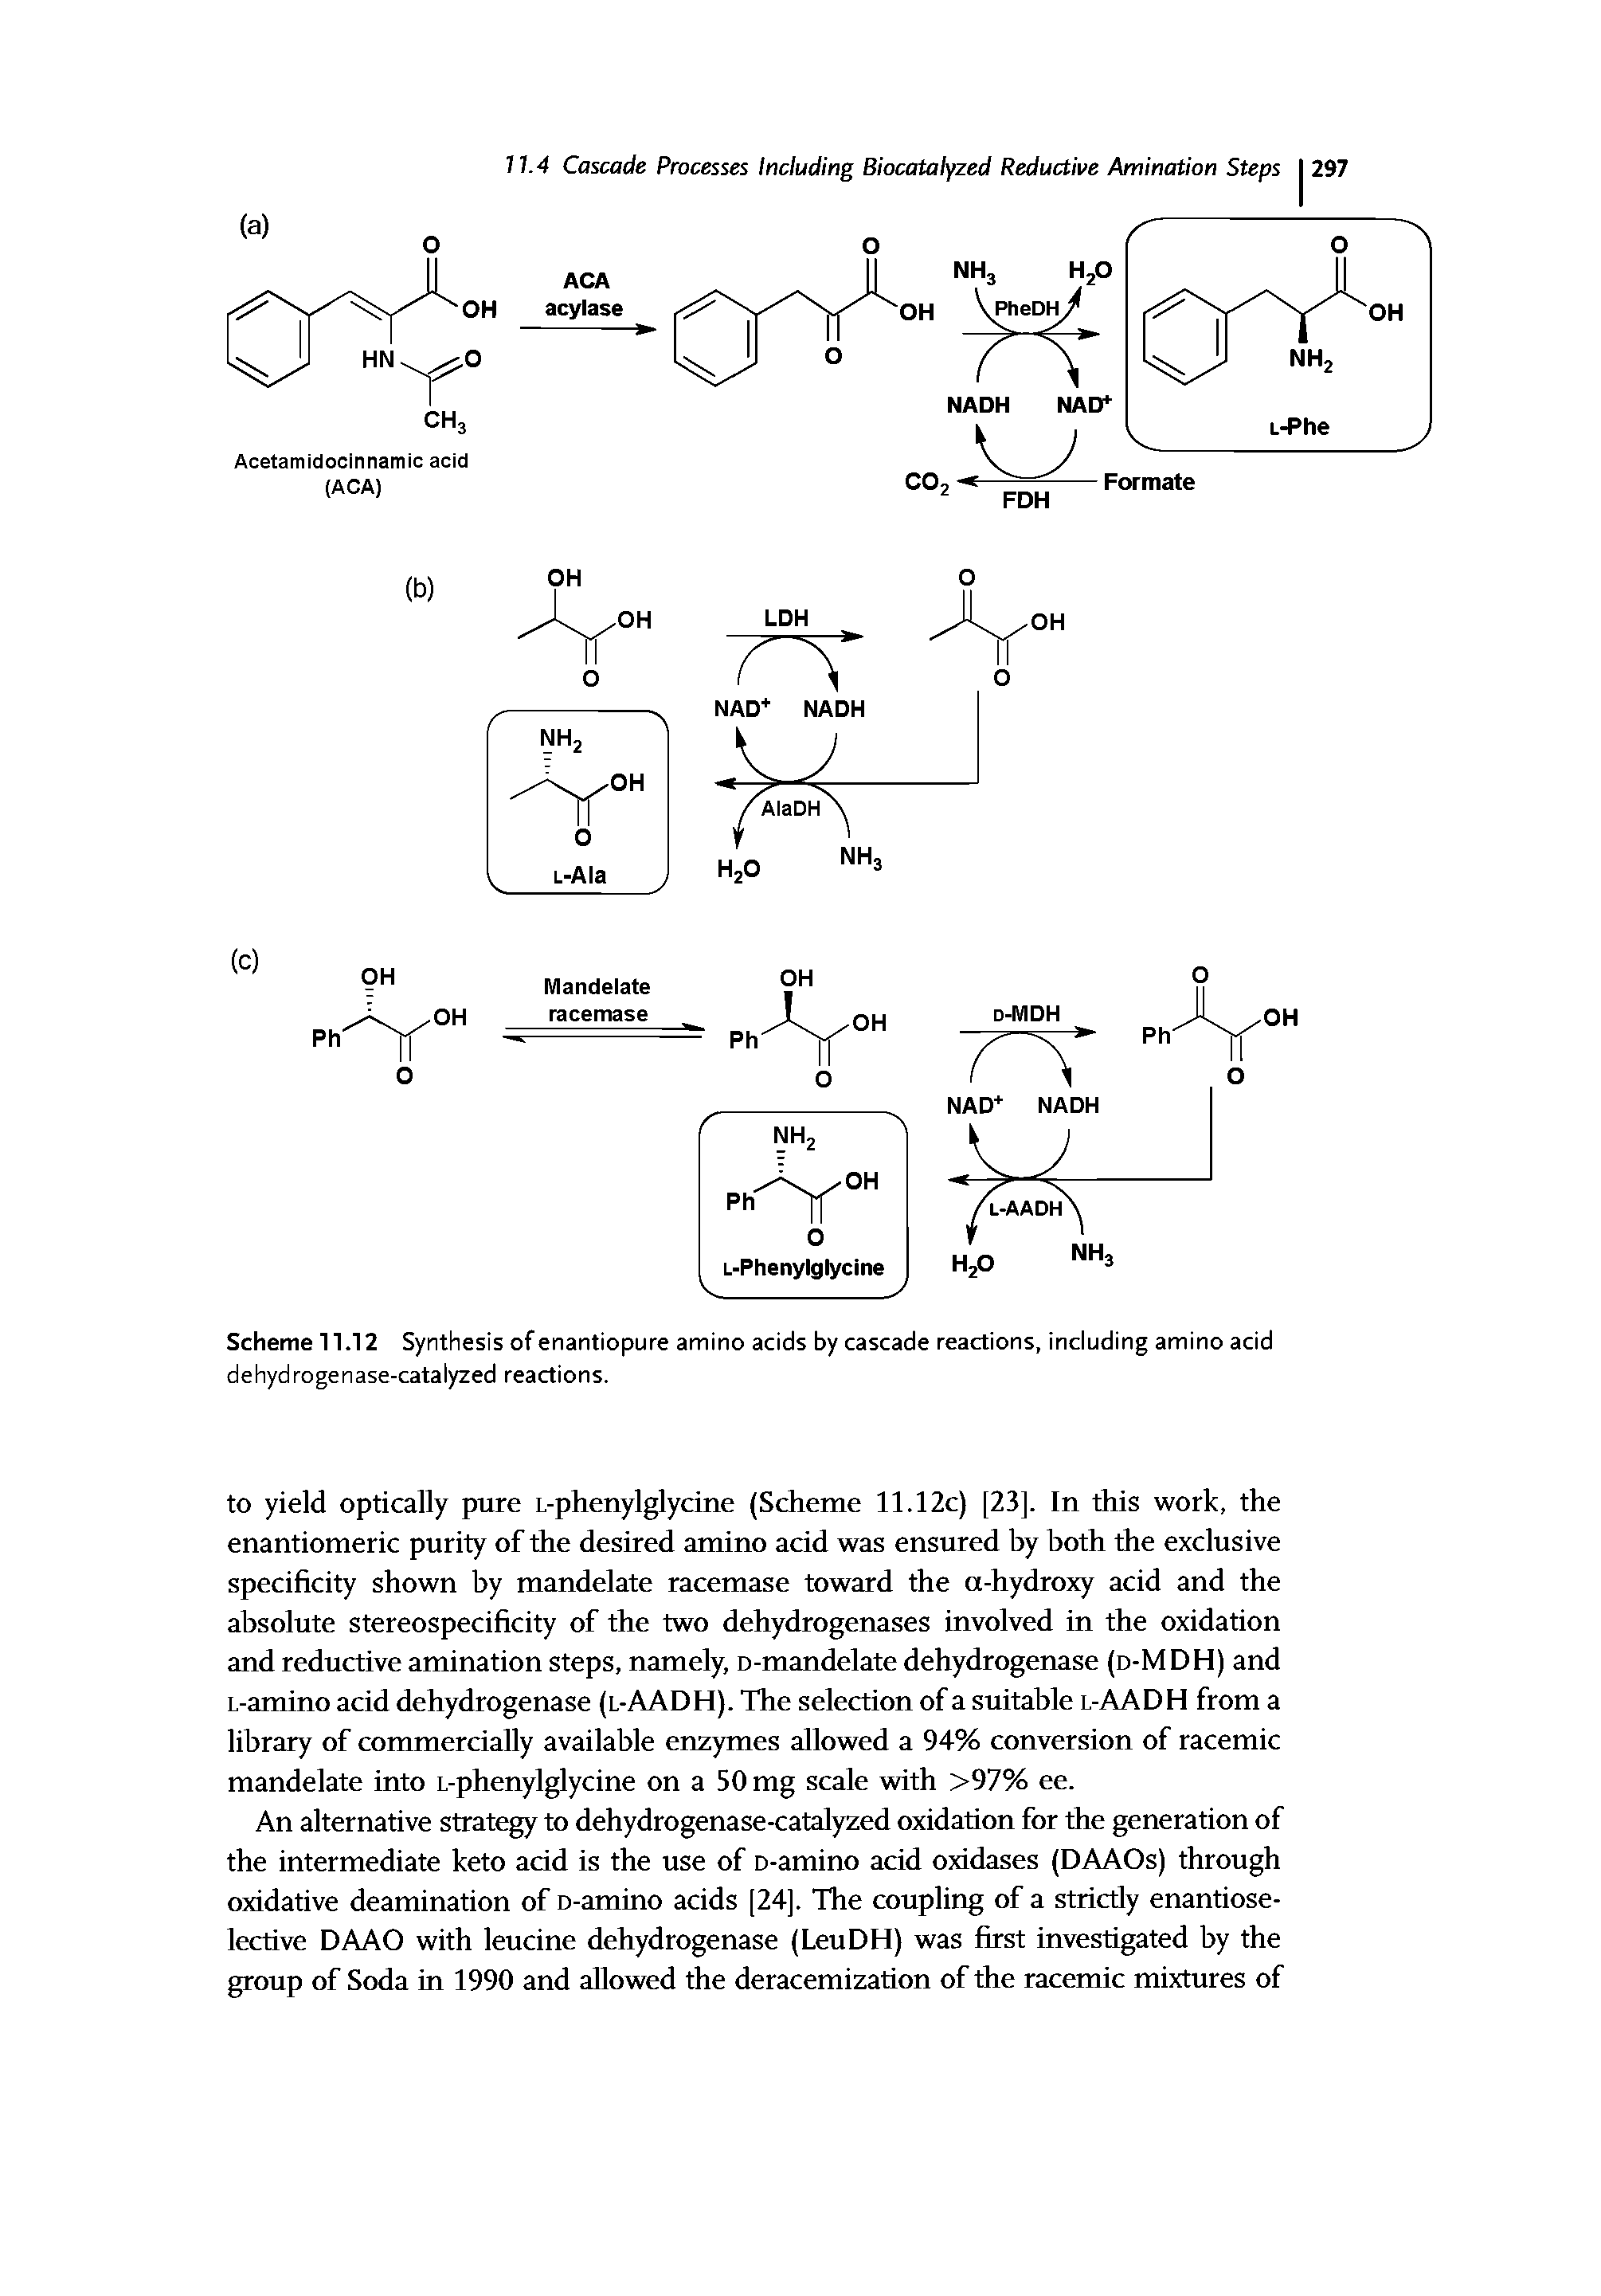 Scheme 11.12 Synthesis of enantiopure amino acids by cascade reactions, including amino acid dehydrogenase-catalyzed reactions.